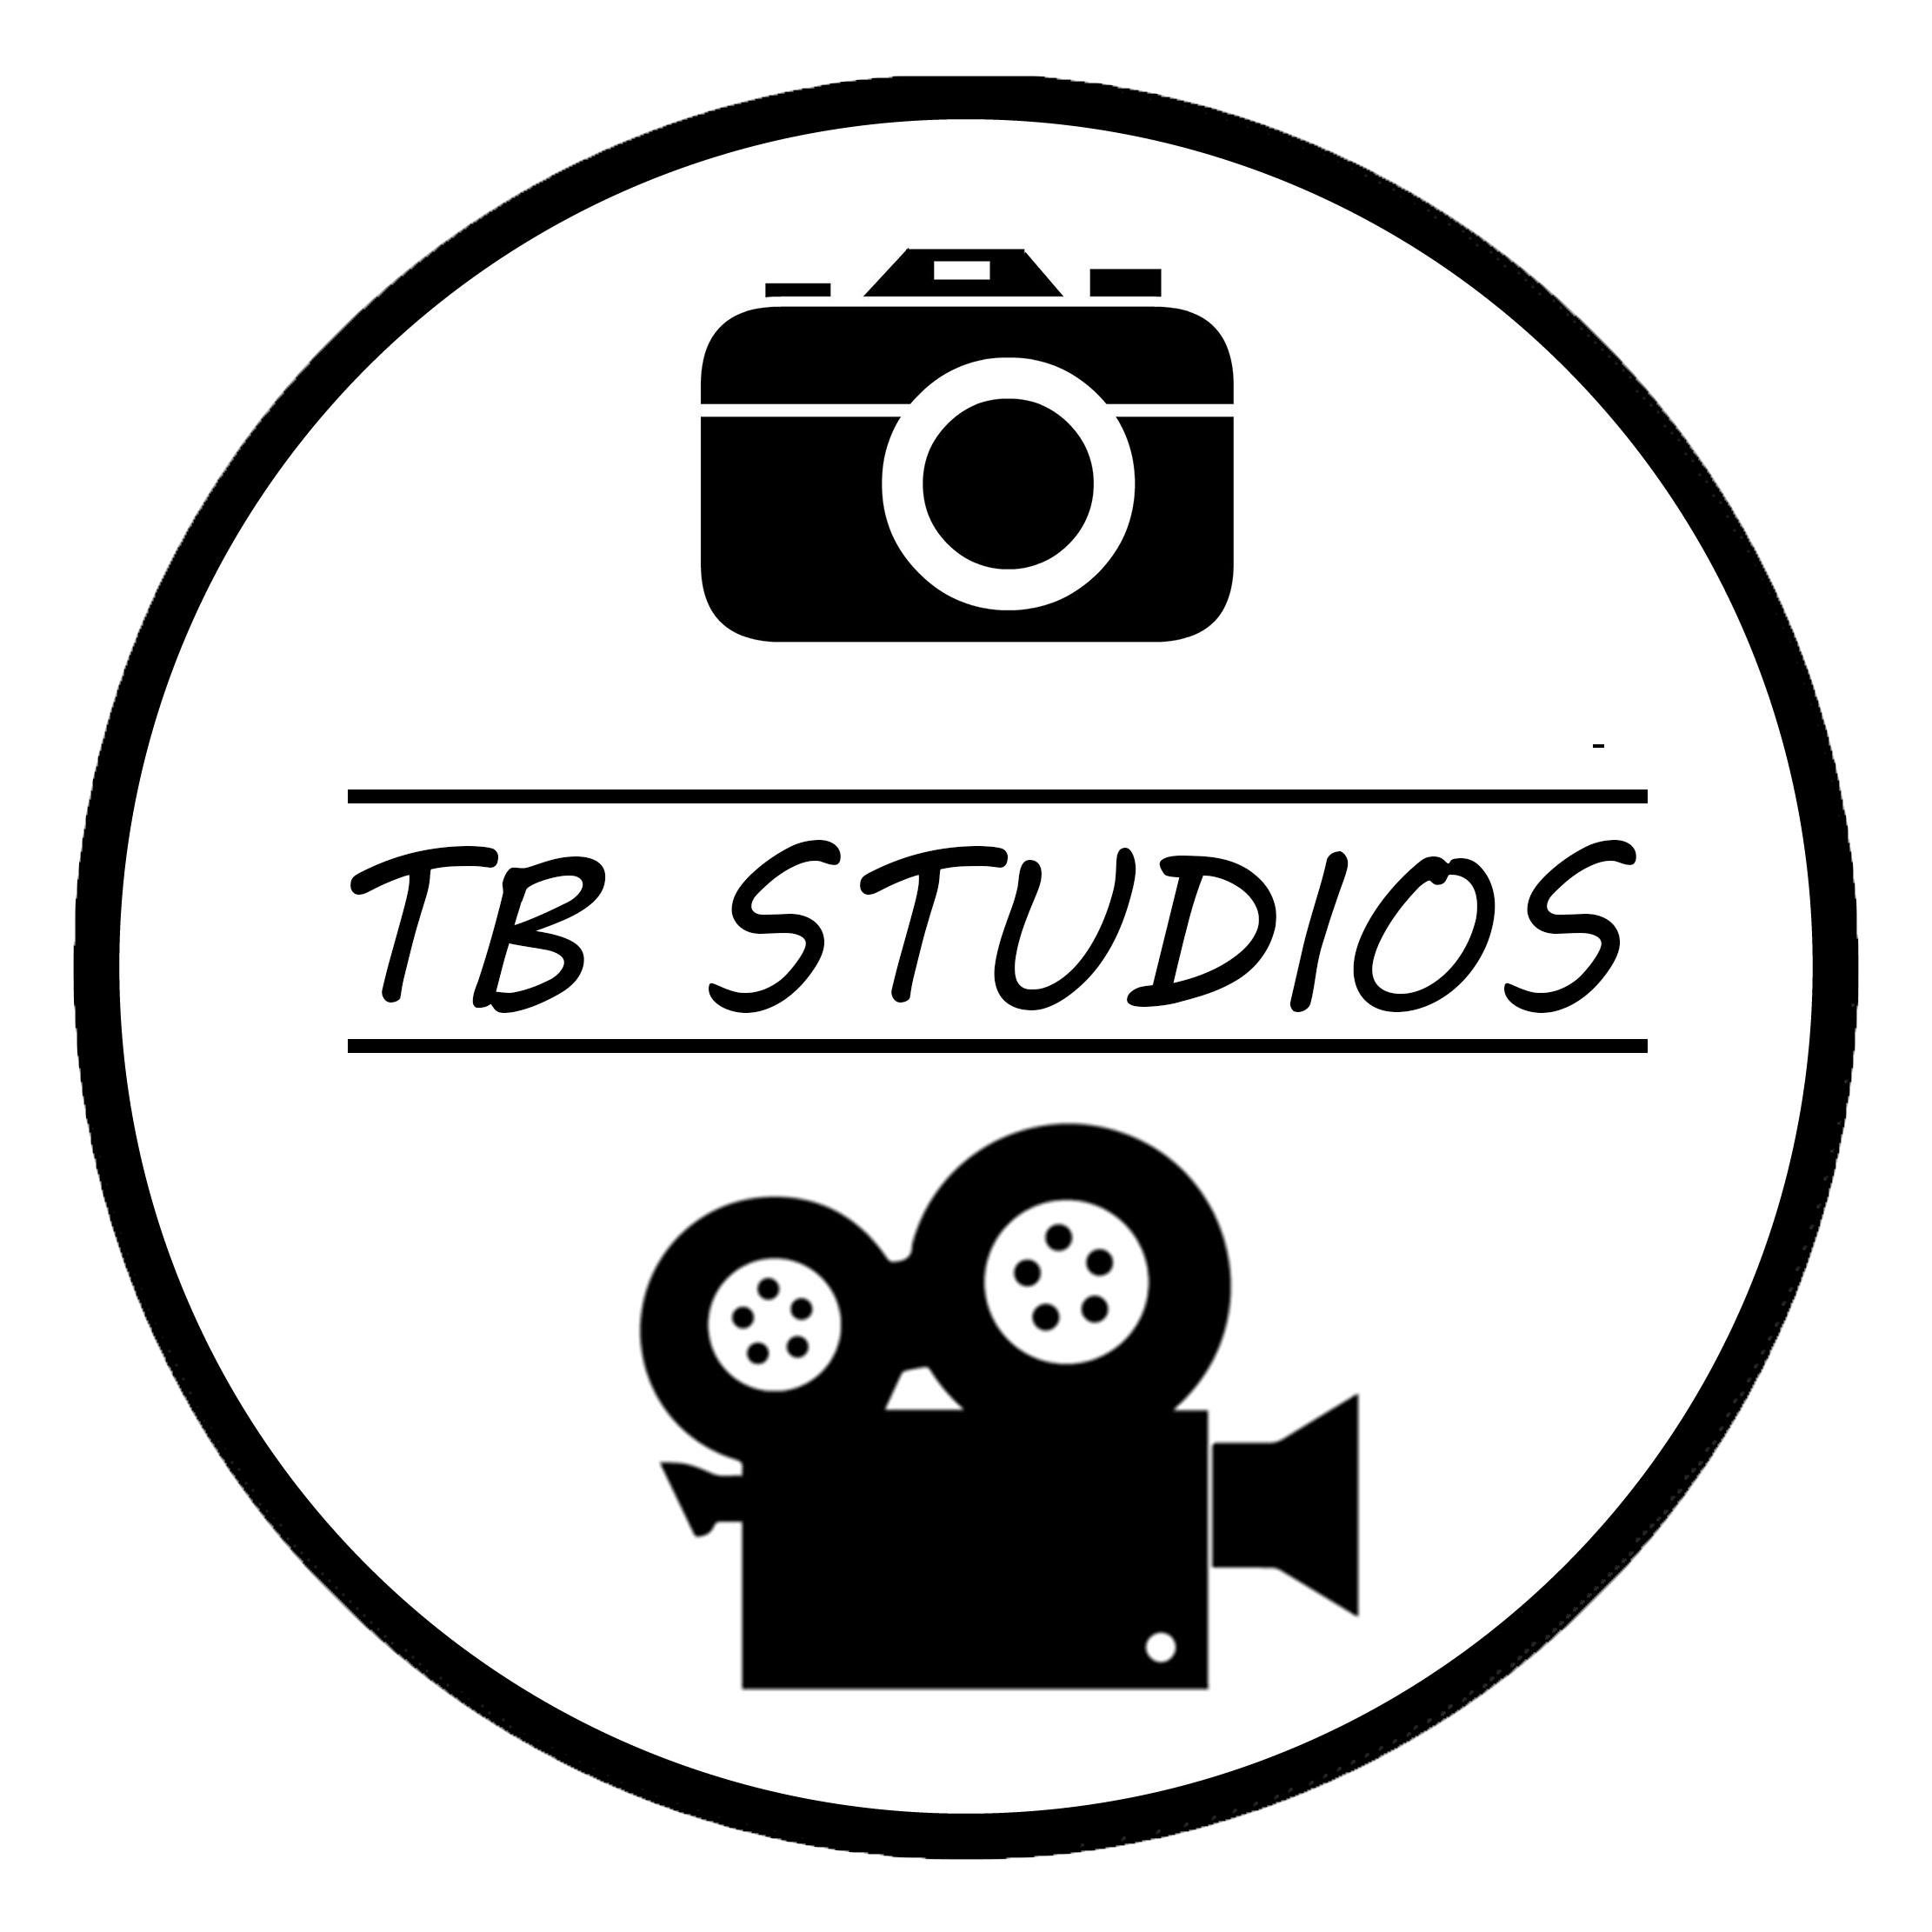 I am a student living in London studying Creative Digital Media Production at BTEC Level. I enjoy using cameras, whether through film or photography and editing